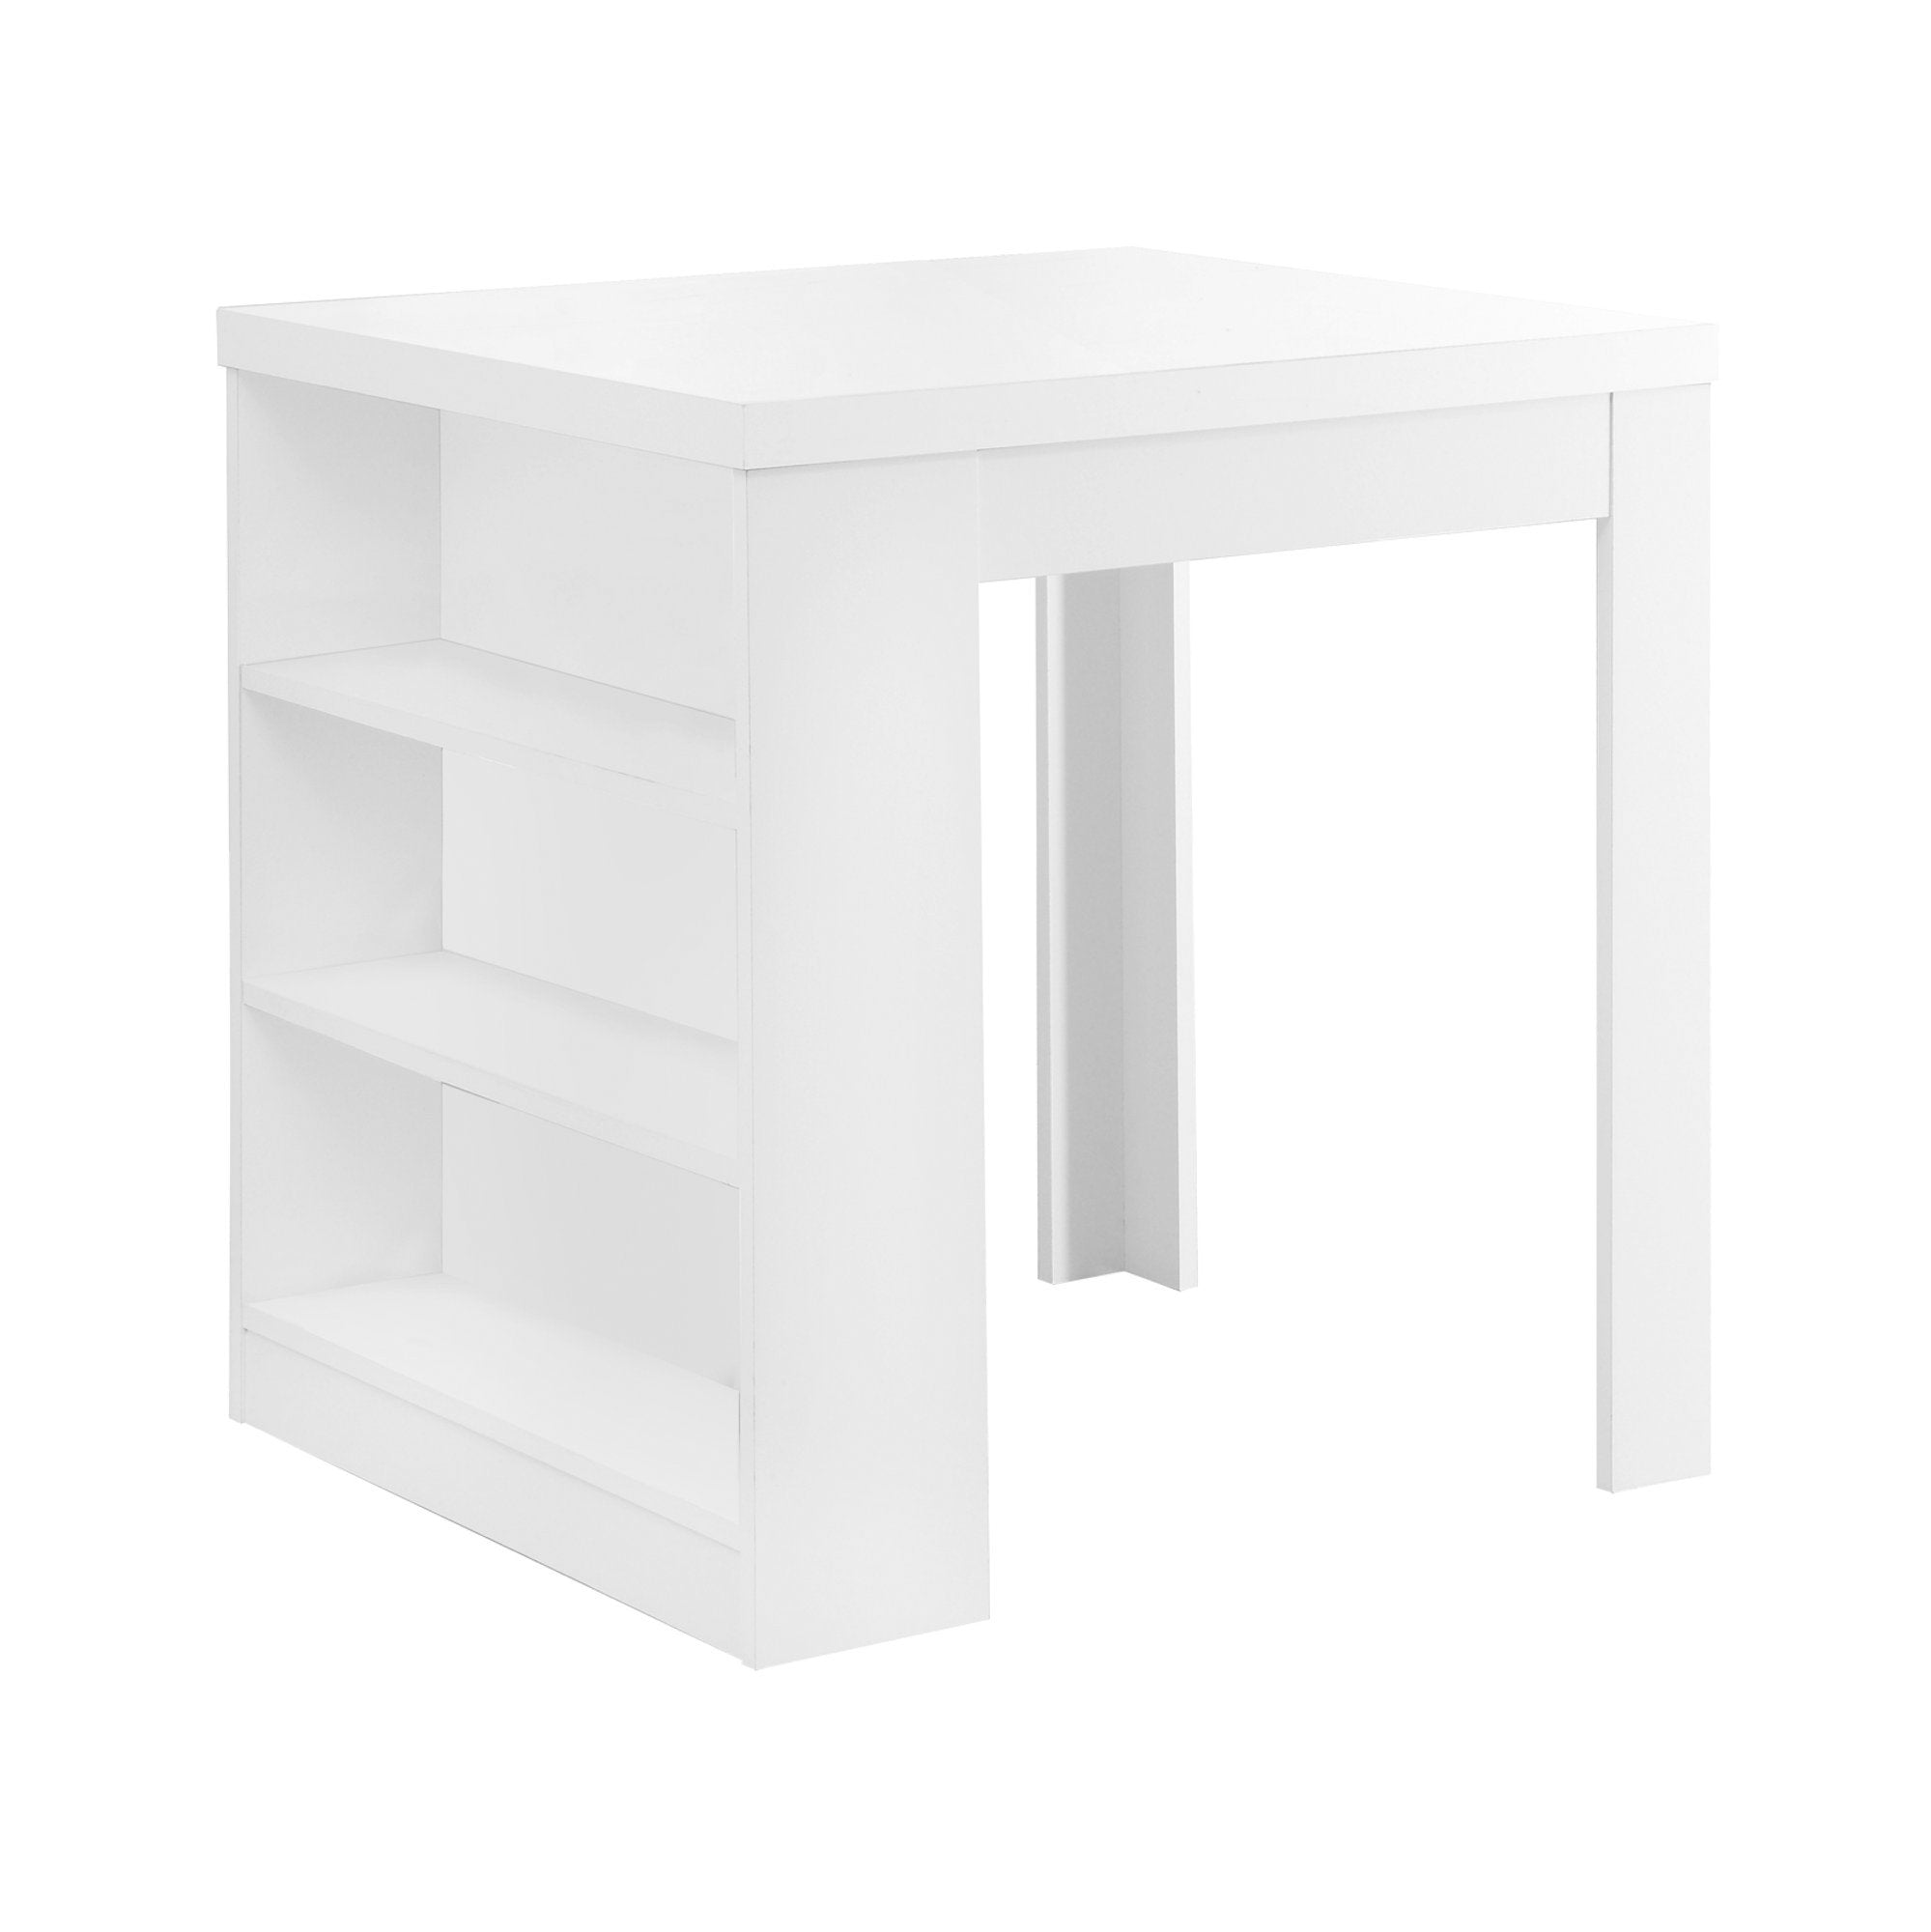 DINING TABLE - 32"X 36" / WHITE COUNTER HEIGHT